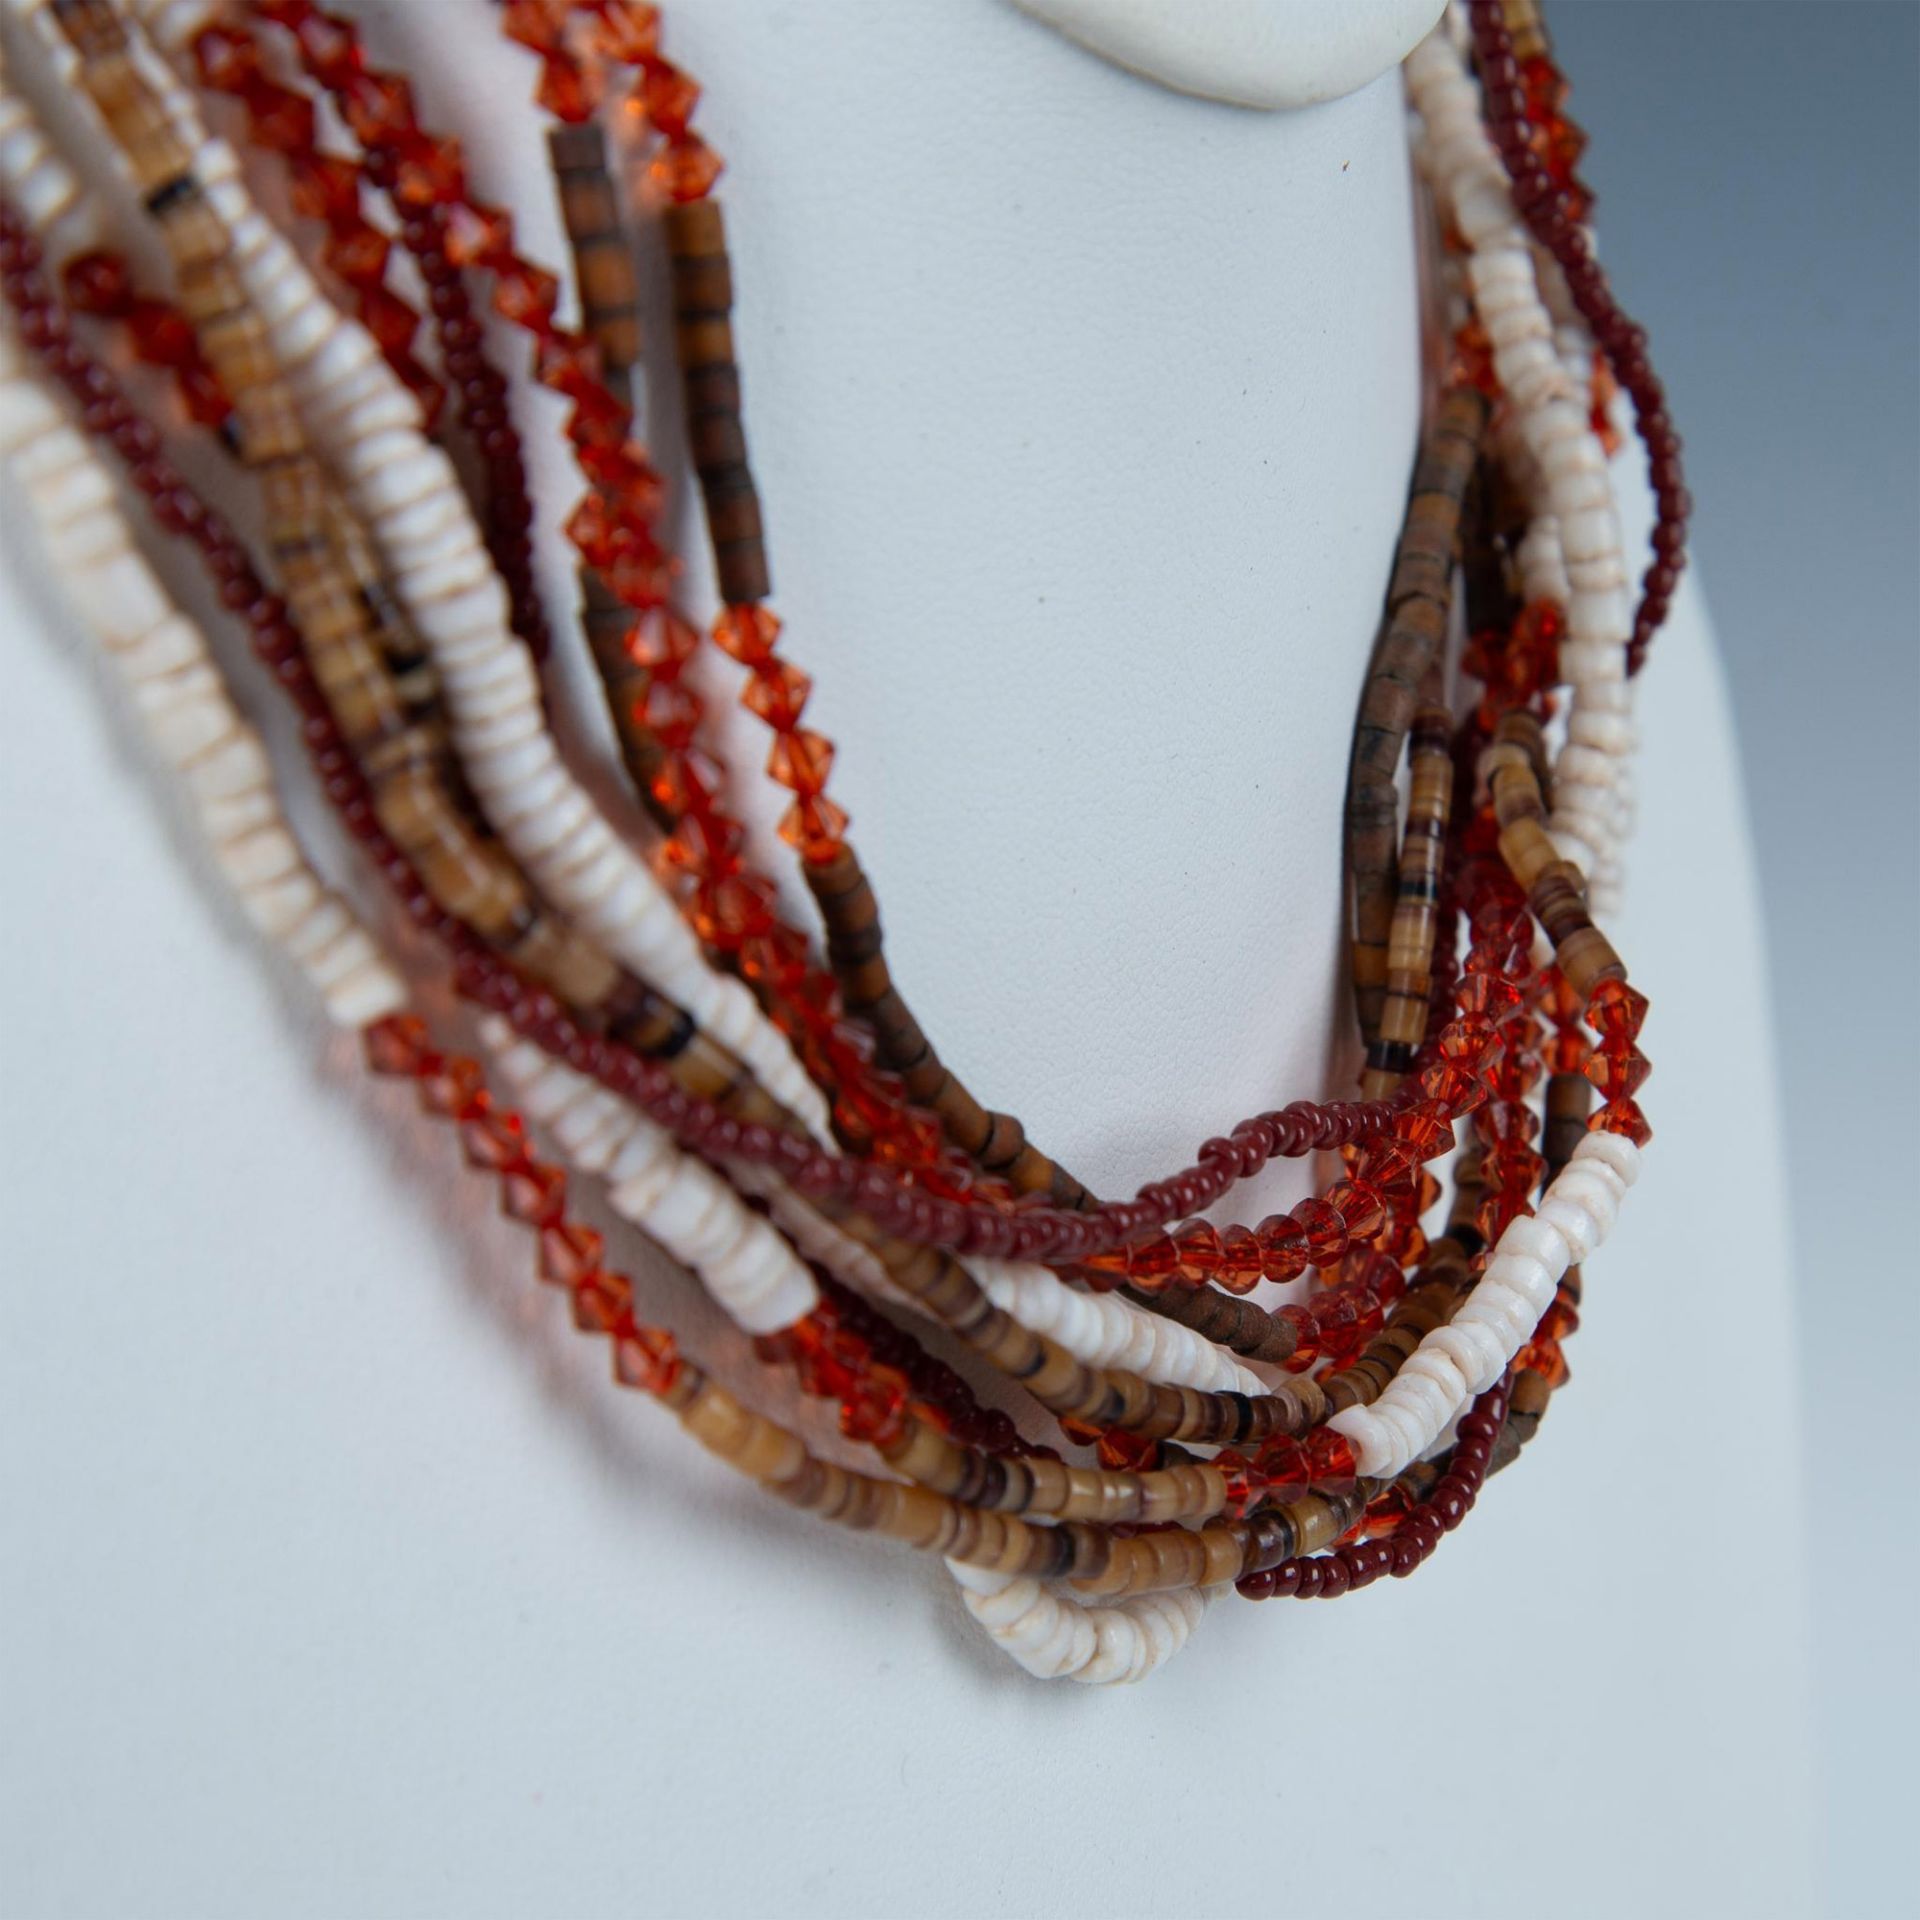 Unique Multistrand Bead Necklace - Image 2 of 3